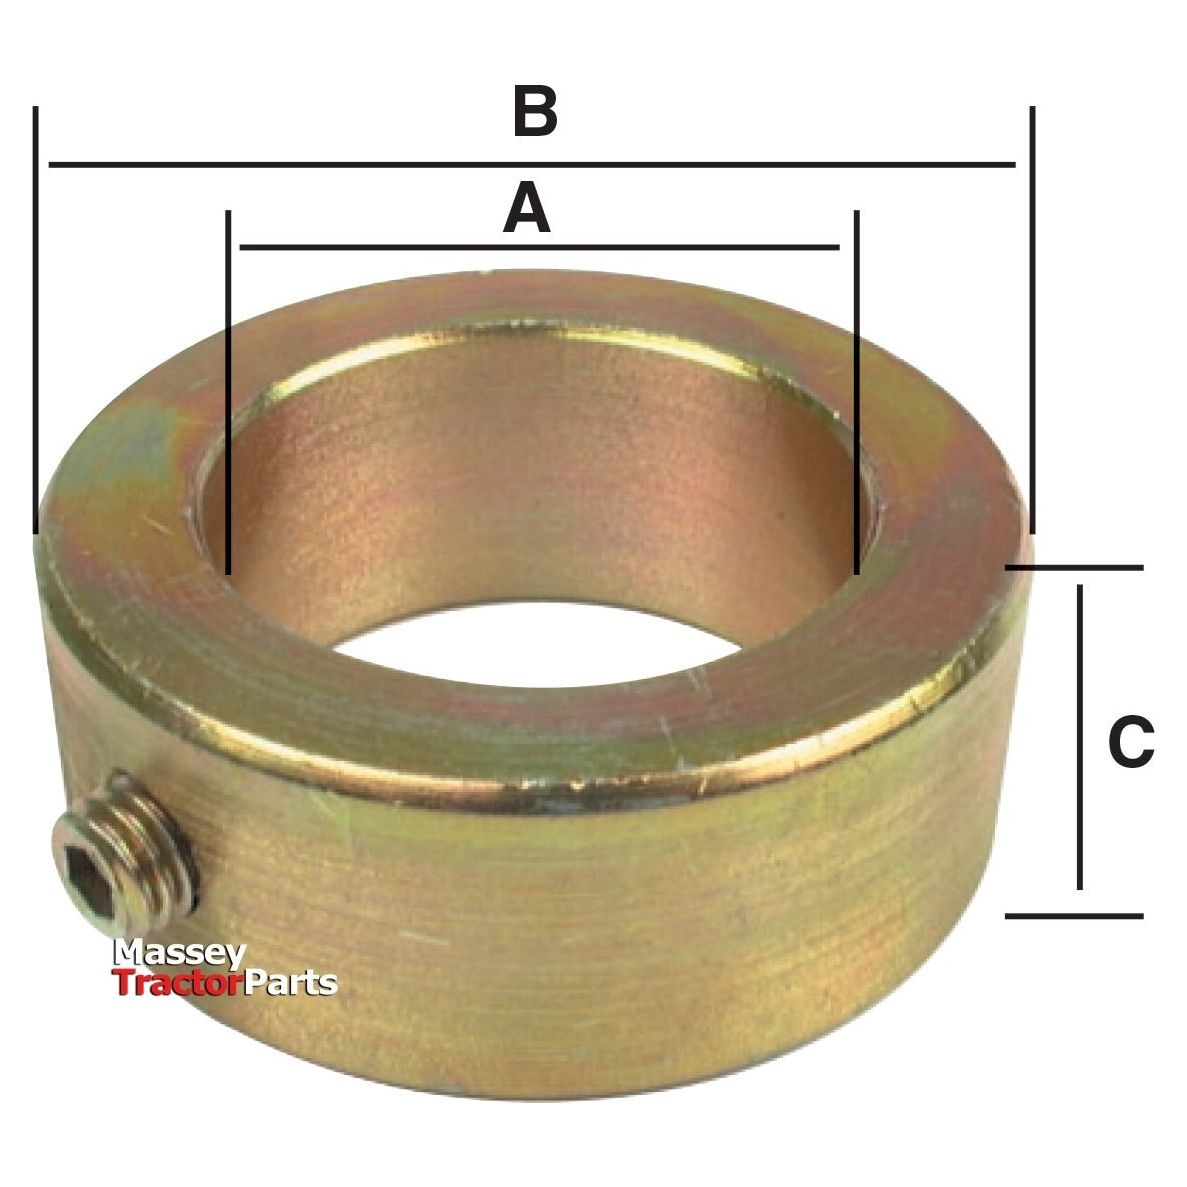 Imperial Shaft Locking Collar, ID: 1 1/8", OD: 1 3/4", Height: 13/16". - S.100 - Farming Parts